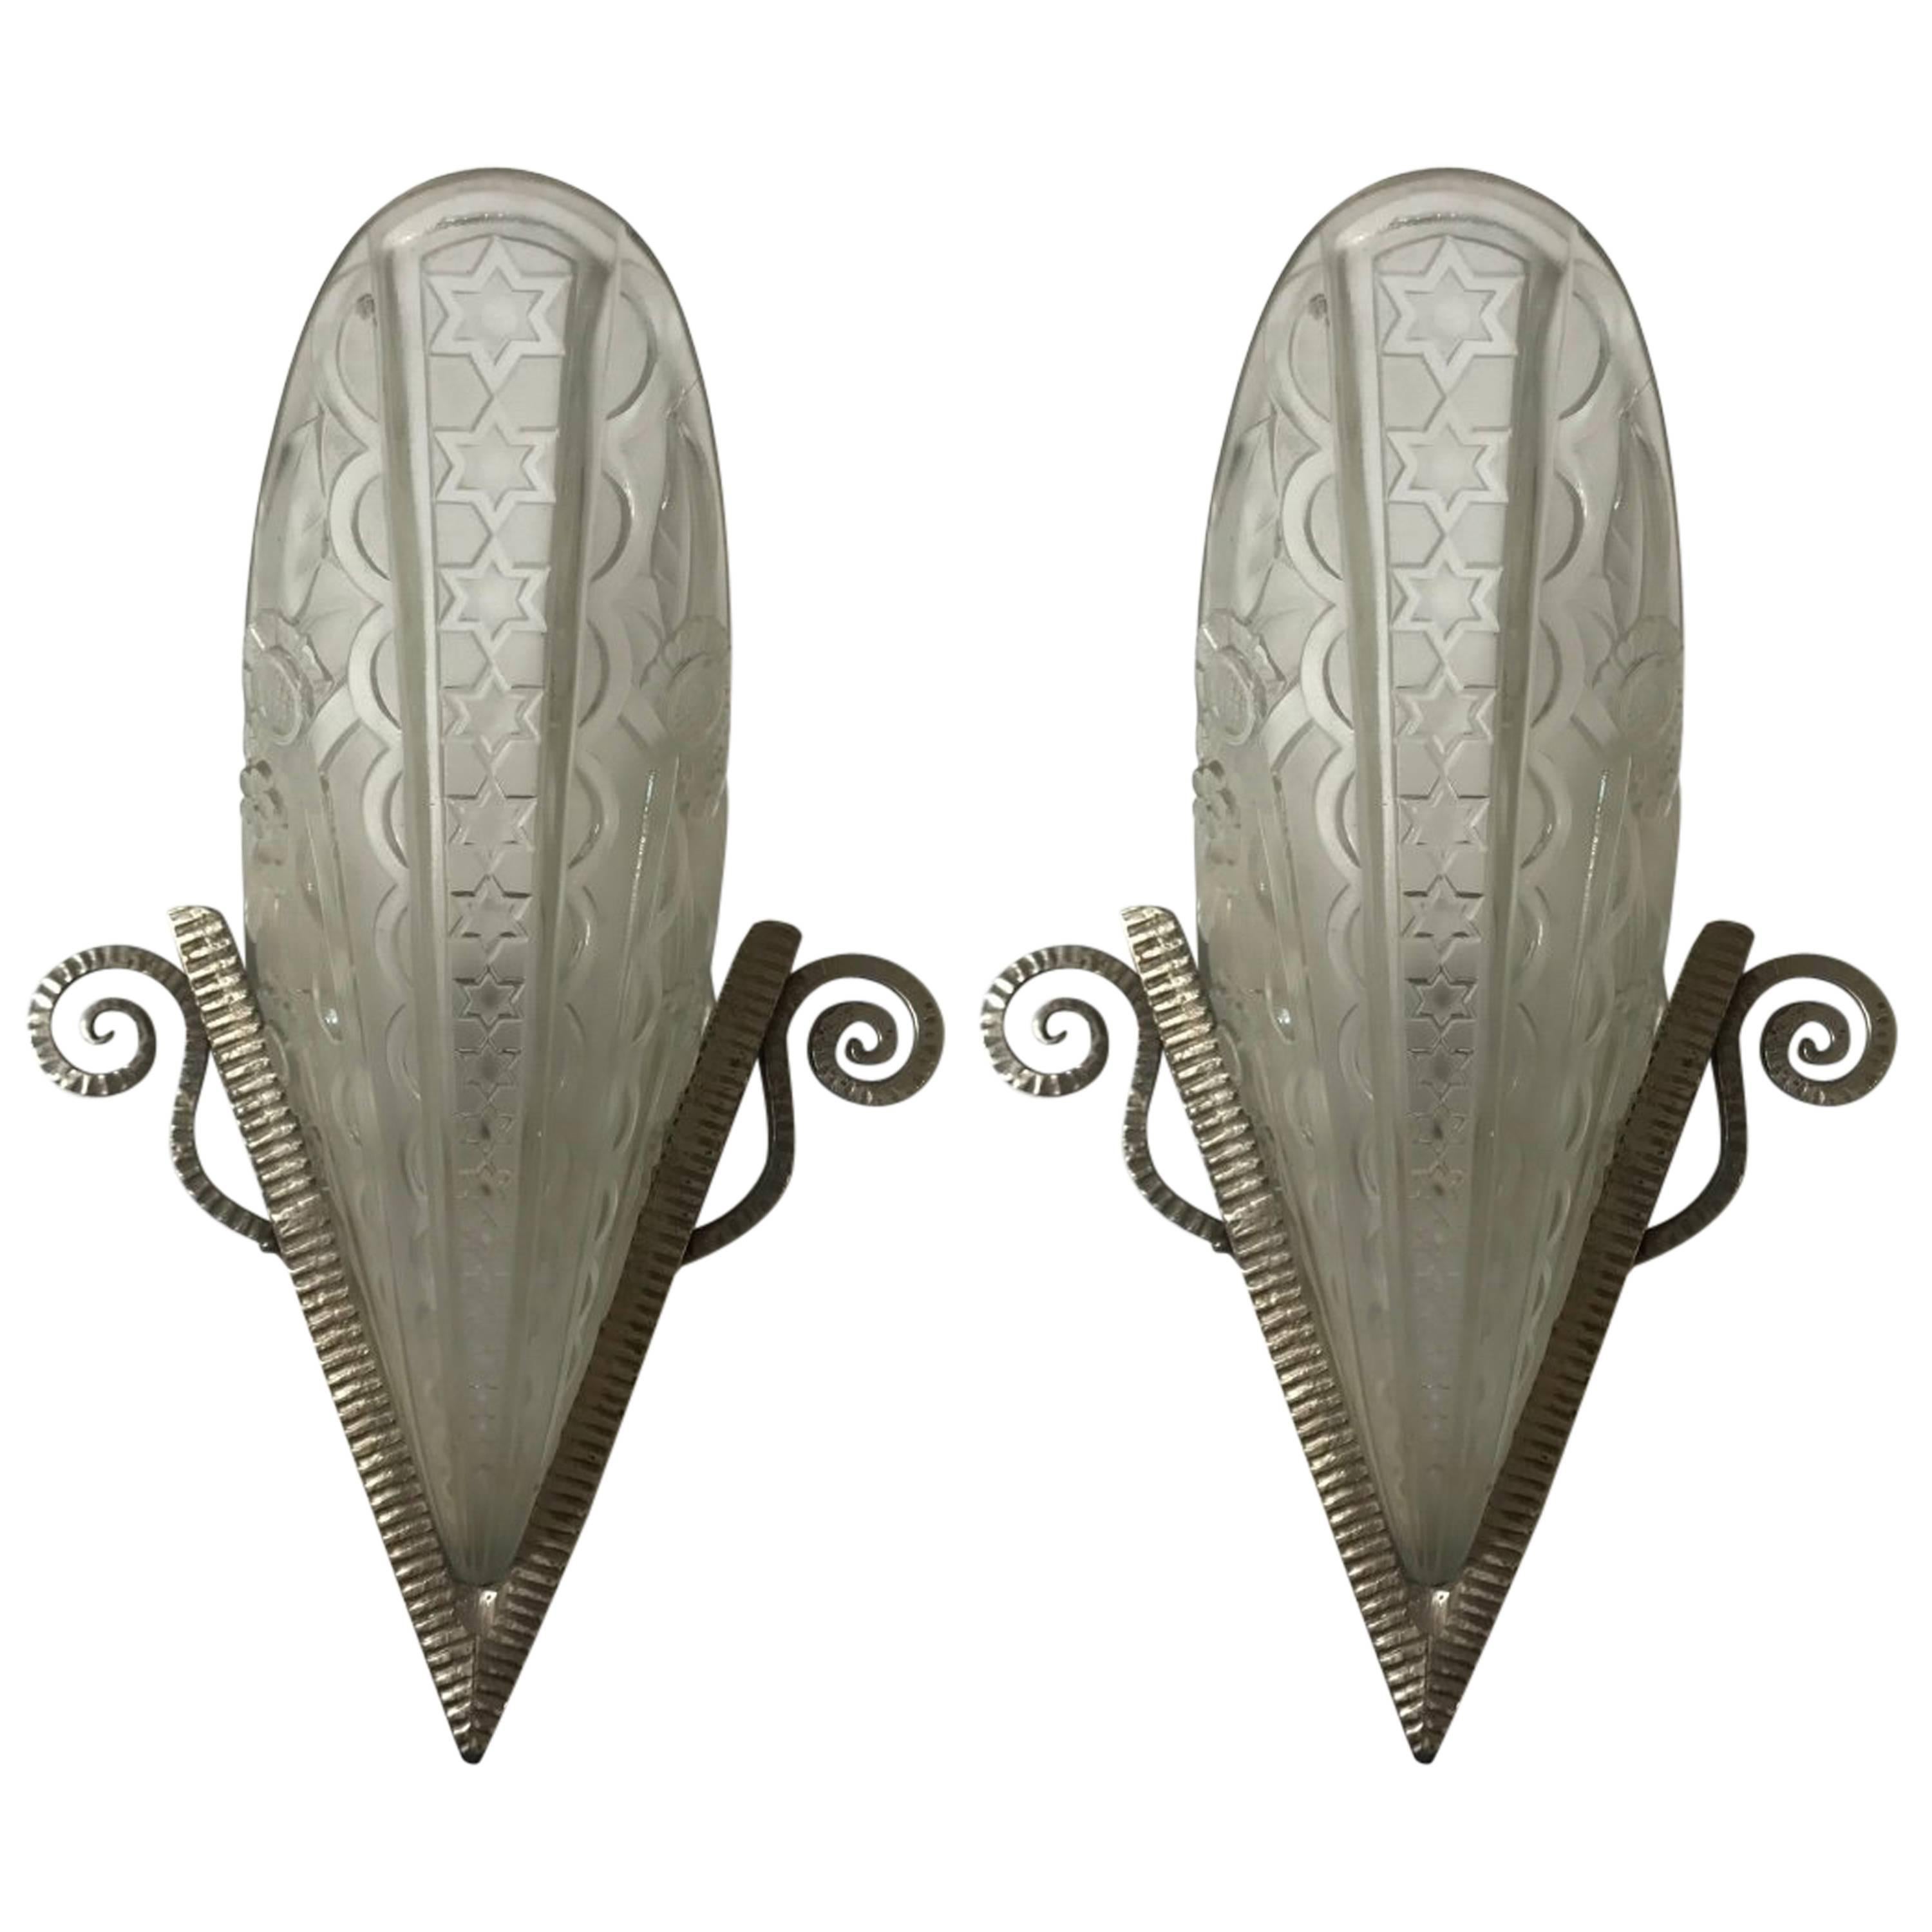 Pair of French Art Deco Wall Sconces by Donna, Paris